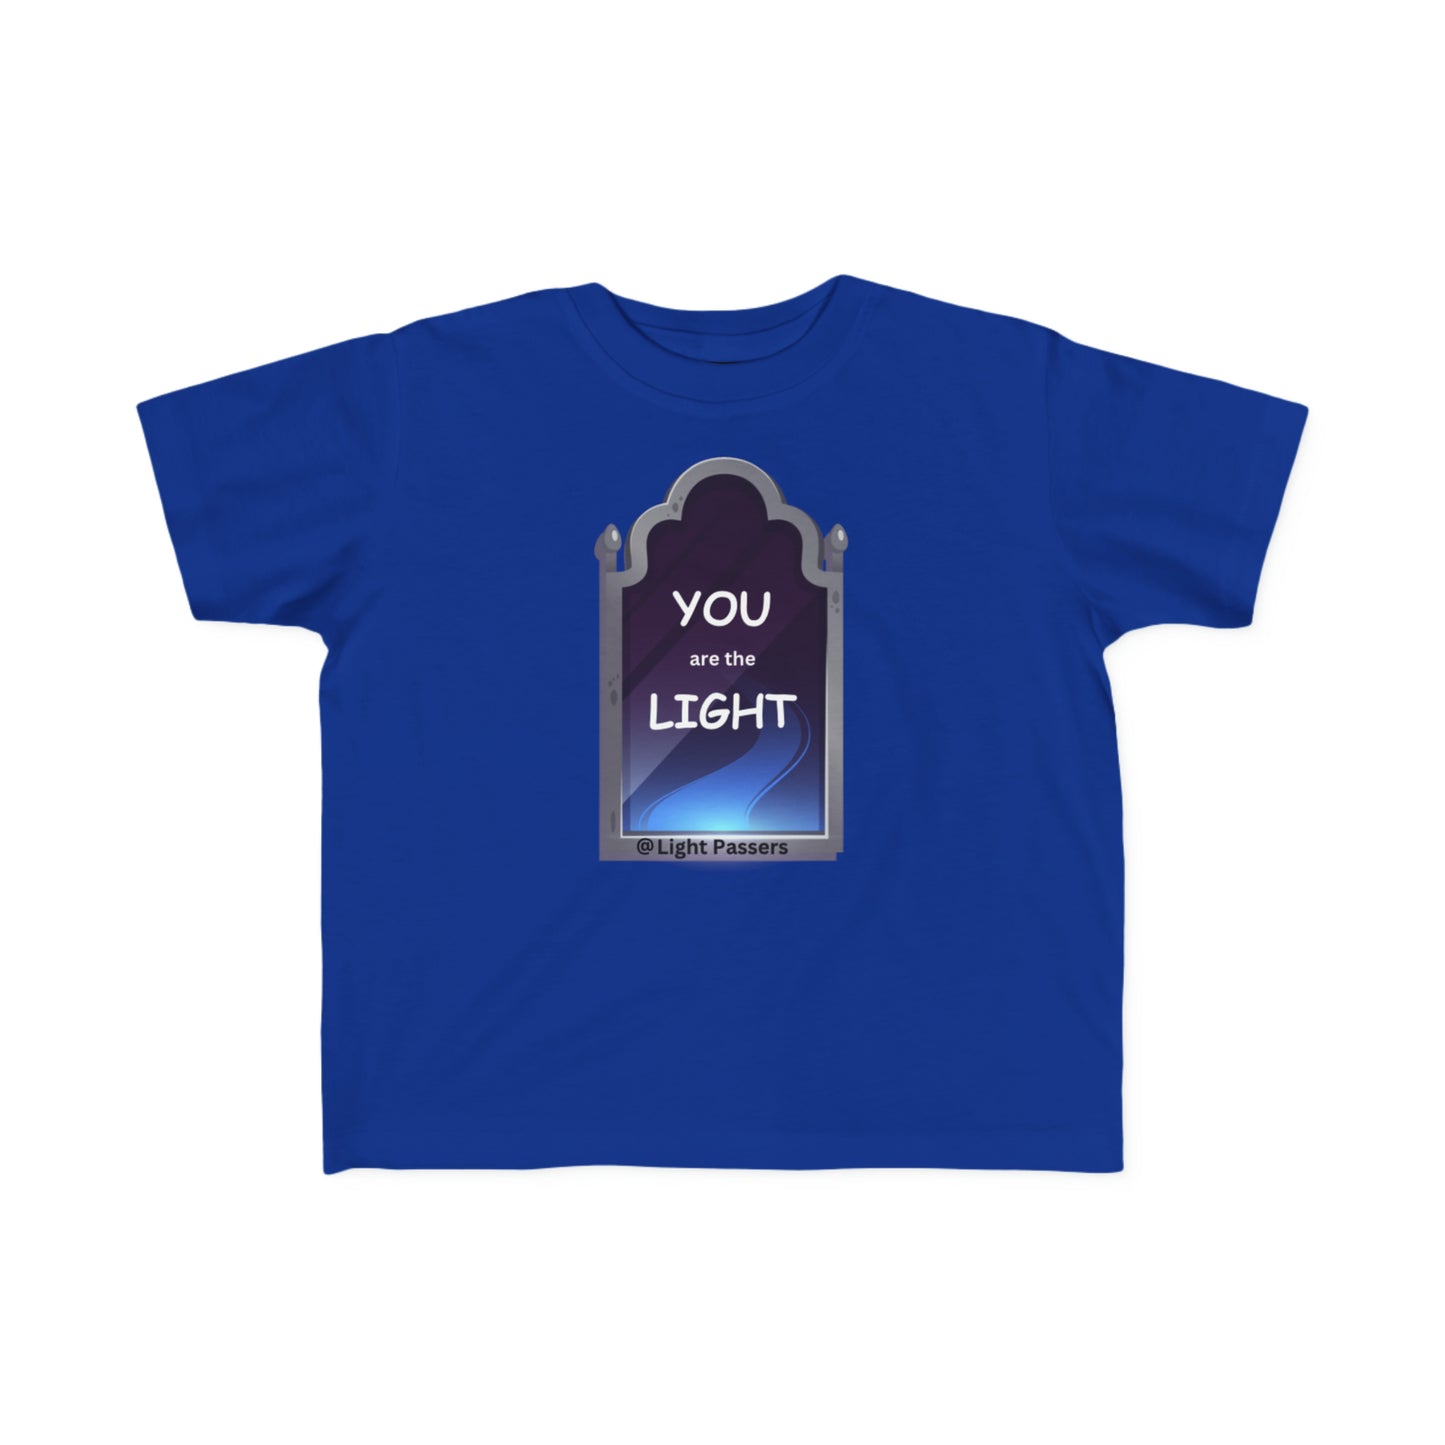 Light Passers Marketplace T shirt You are the Light mirror Toddler T-shirt Simple Messages, Mental Health, Inspirational Messages